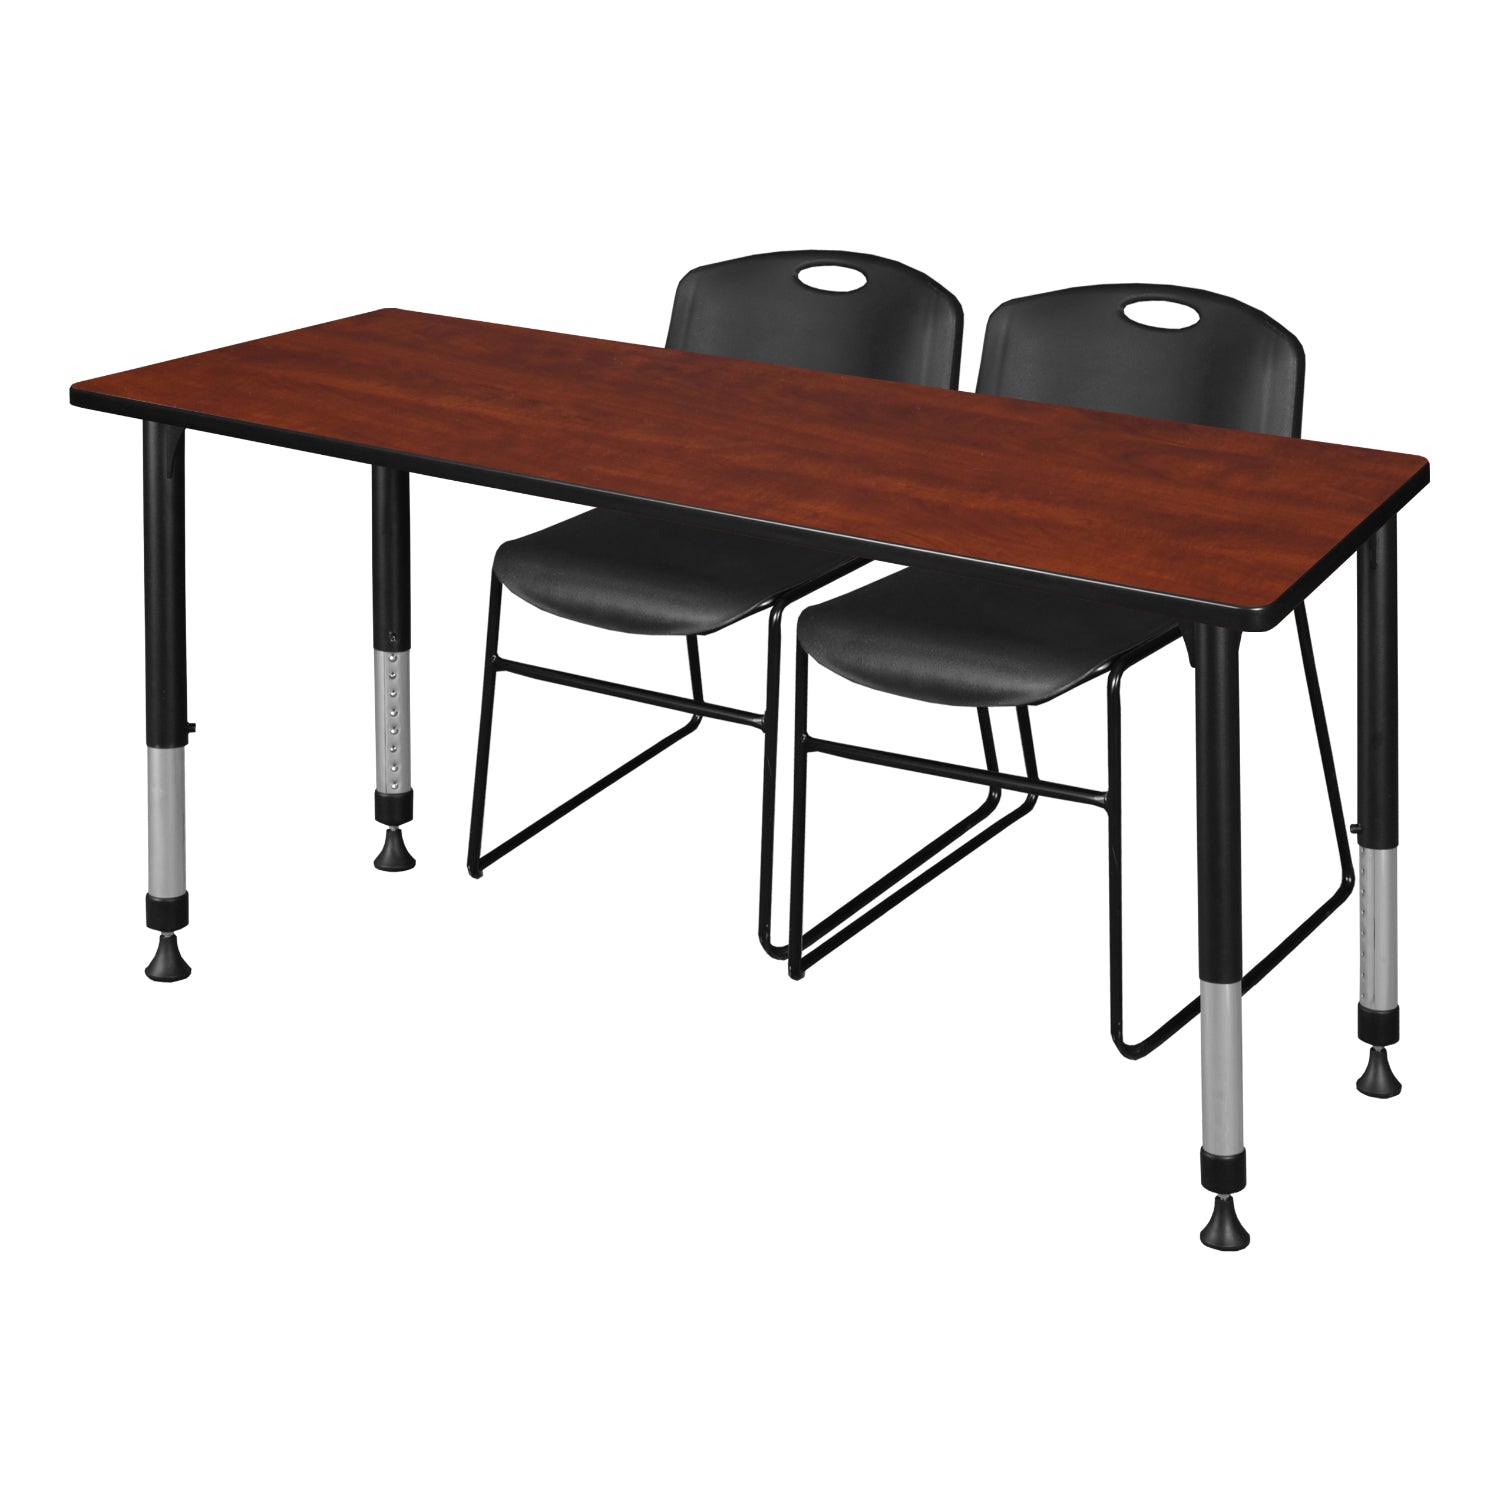 Kee Classroom Table and Chair Package, Kee 60" x 30" Rectangular Adjustable Height Table with 2 Black Zeng Stack Chairs